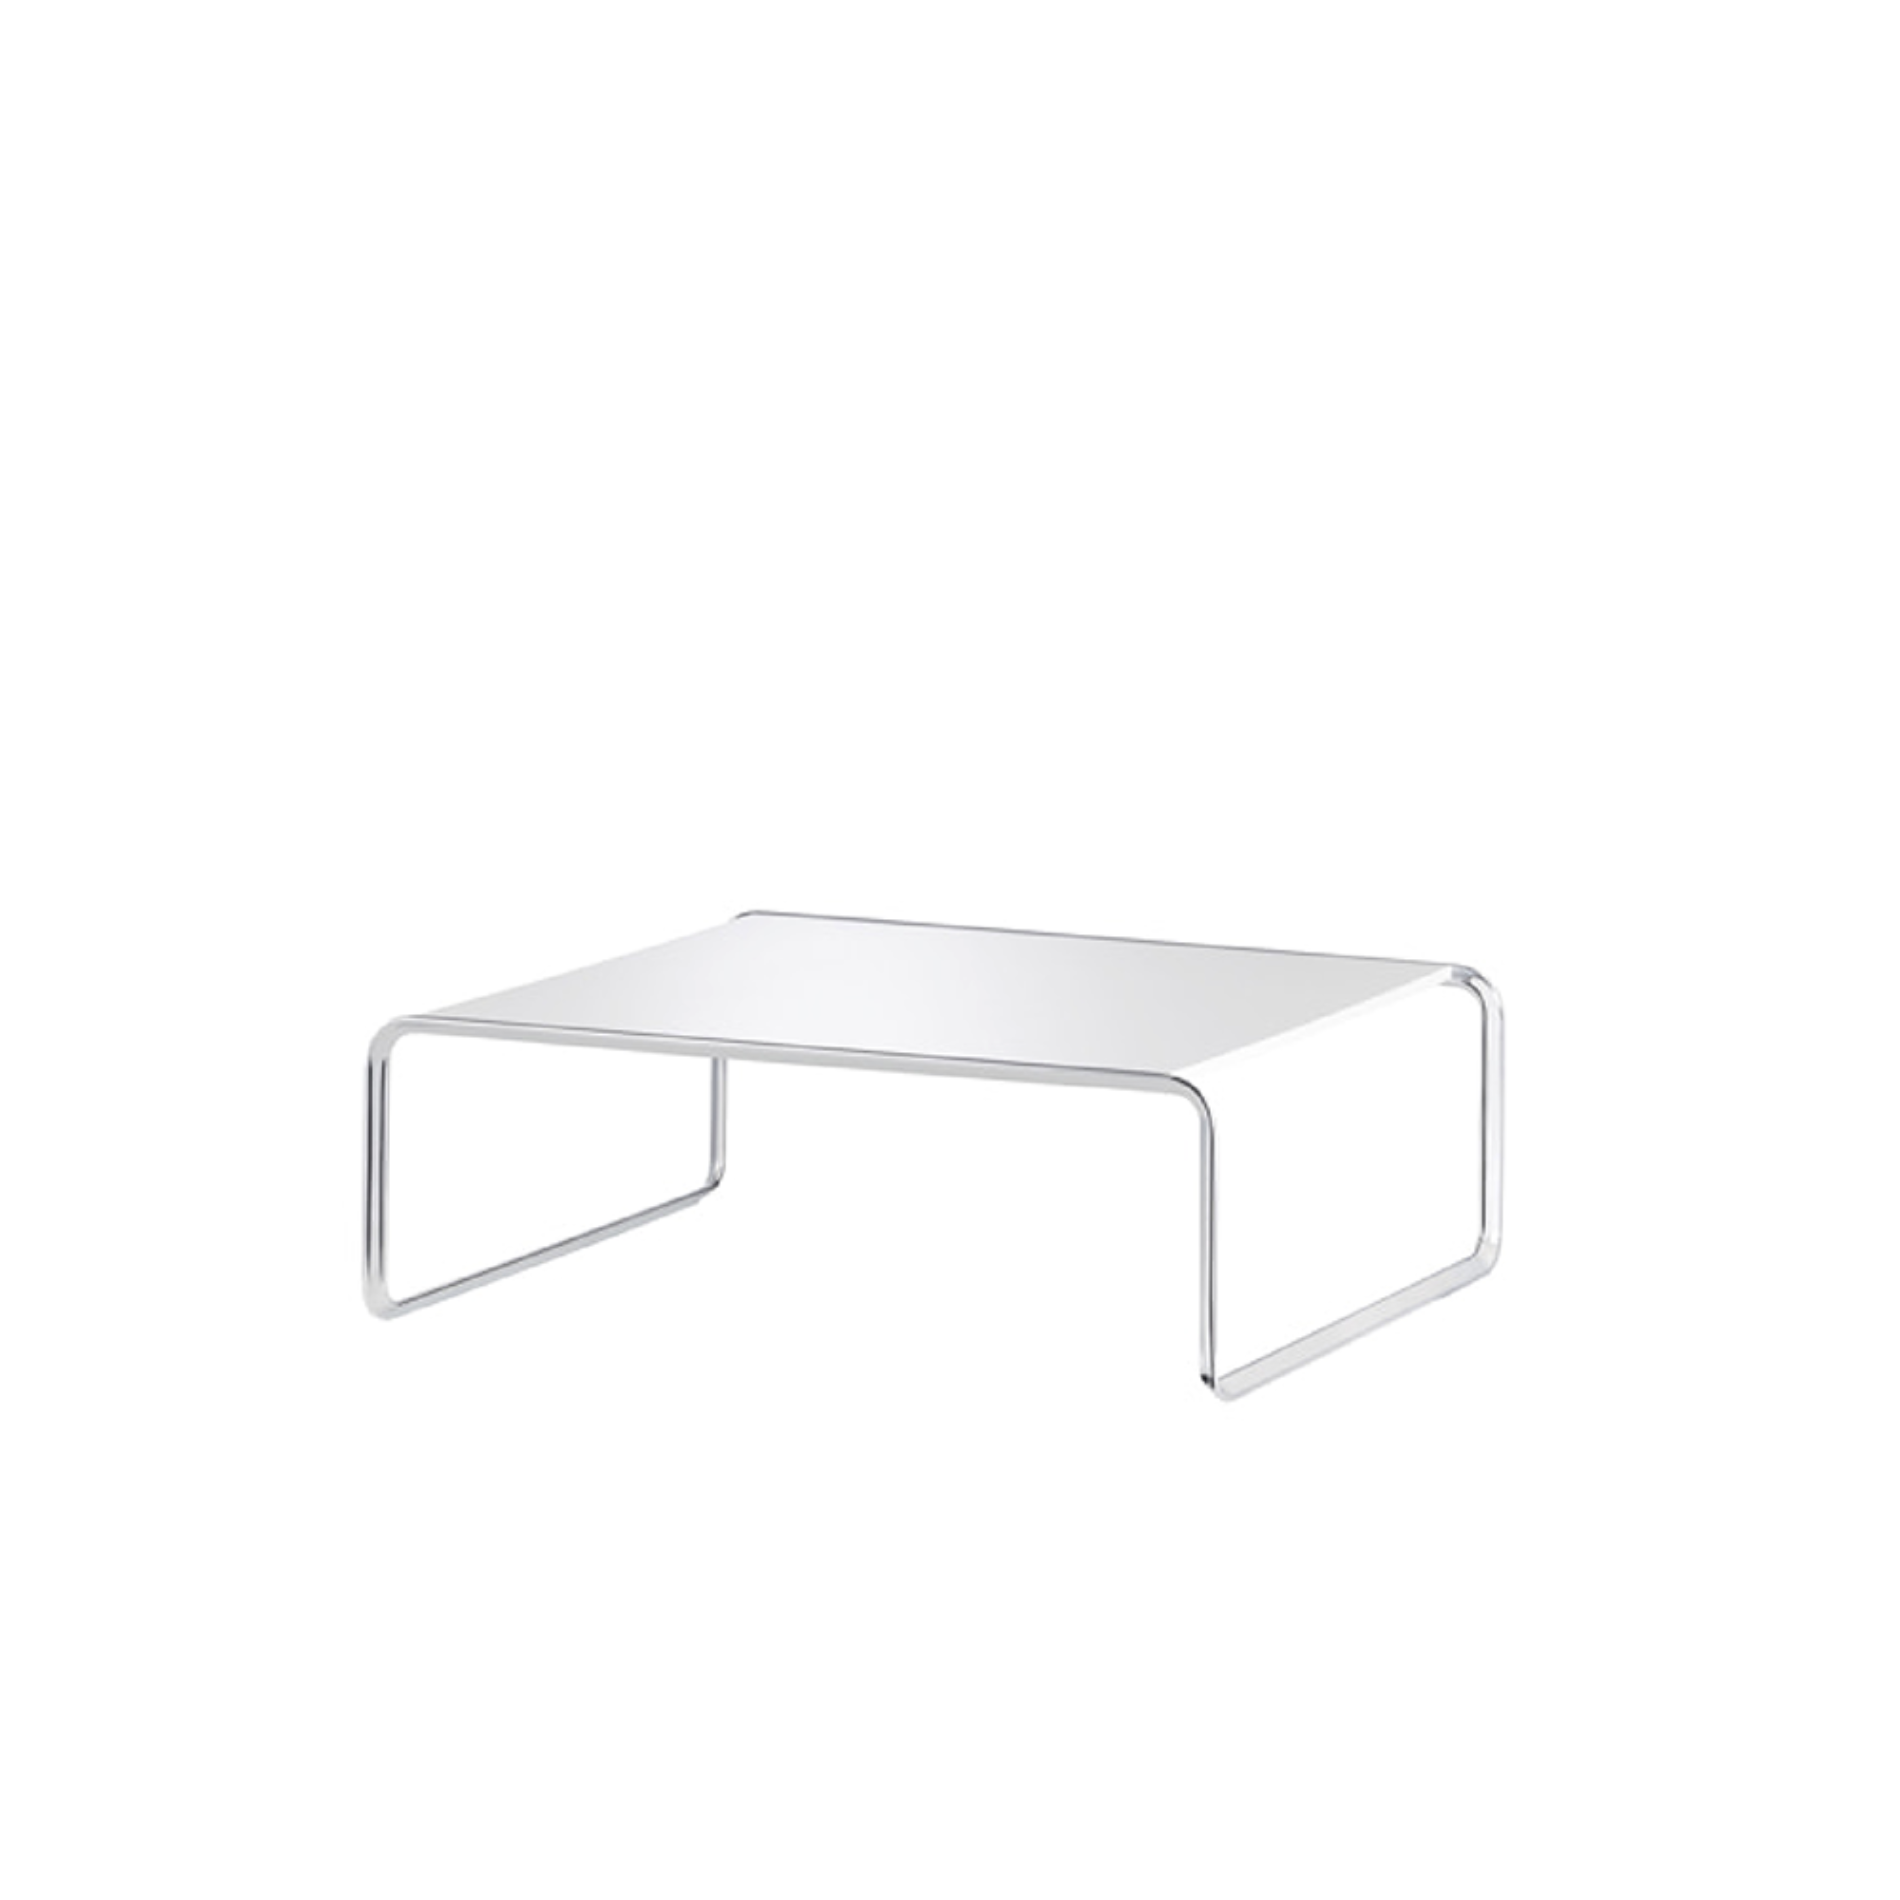 TECTA K1A Oblique Couch Table - White